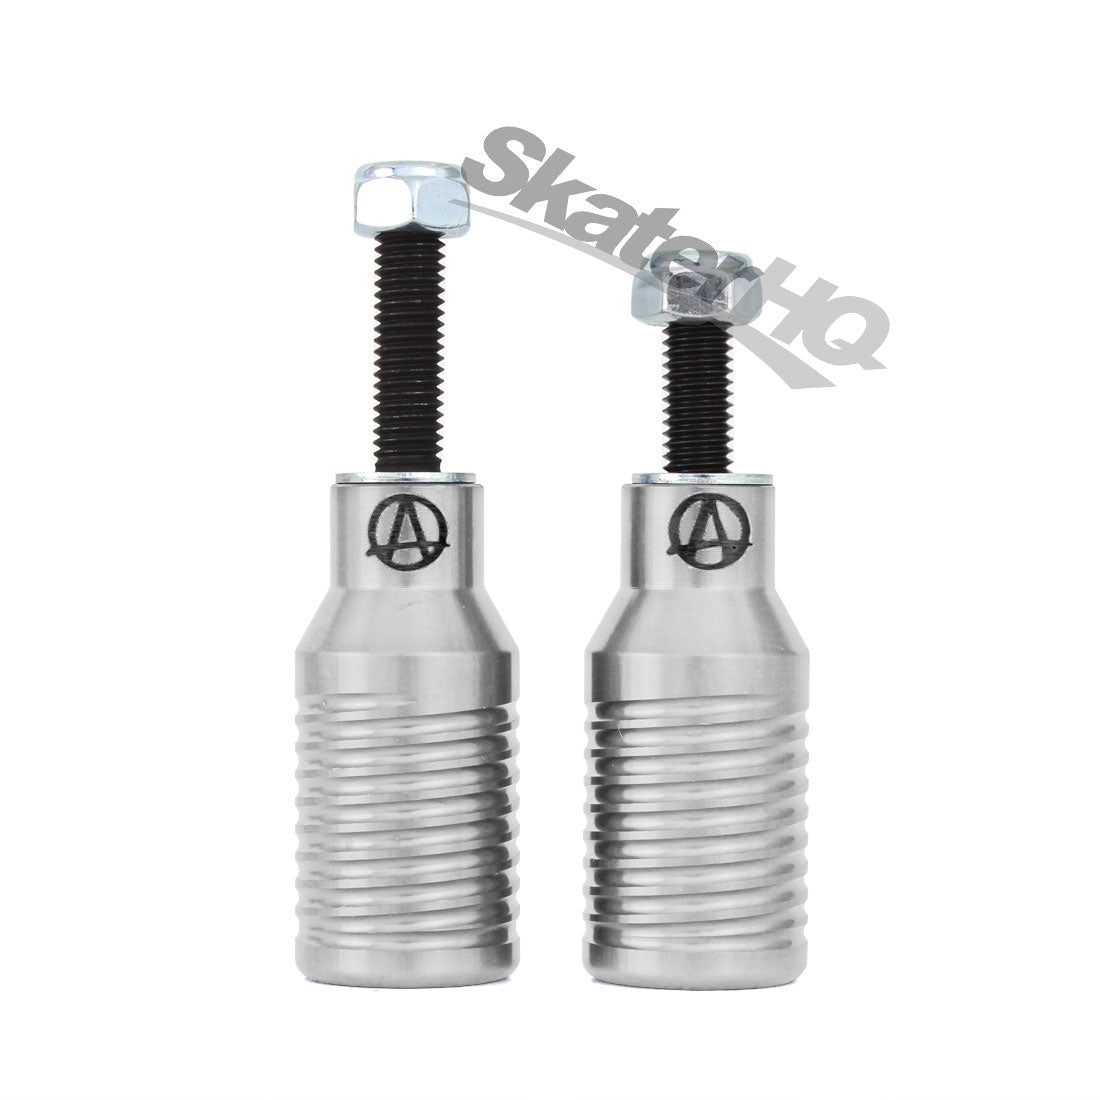 Apex Bowie Pegs 2pk - Silver Scooter Hardware and Parts